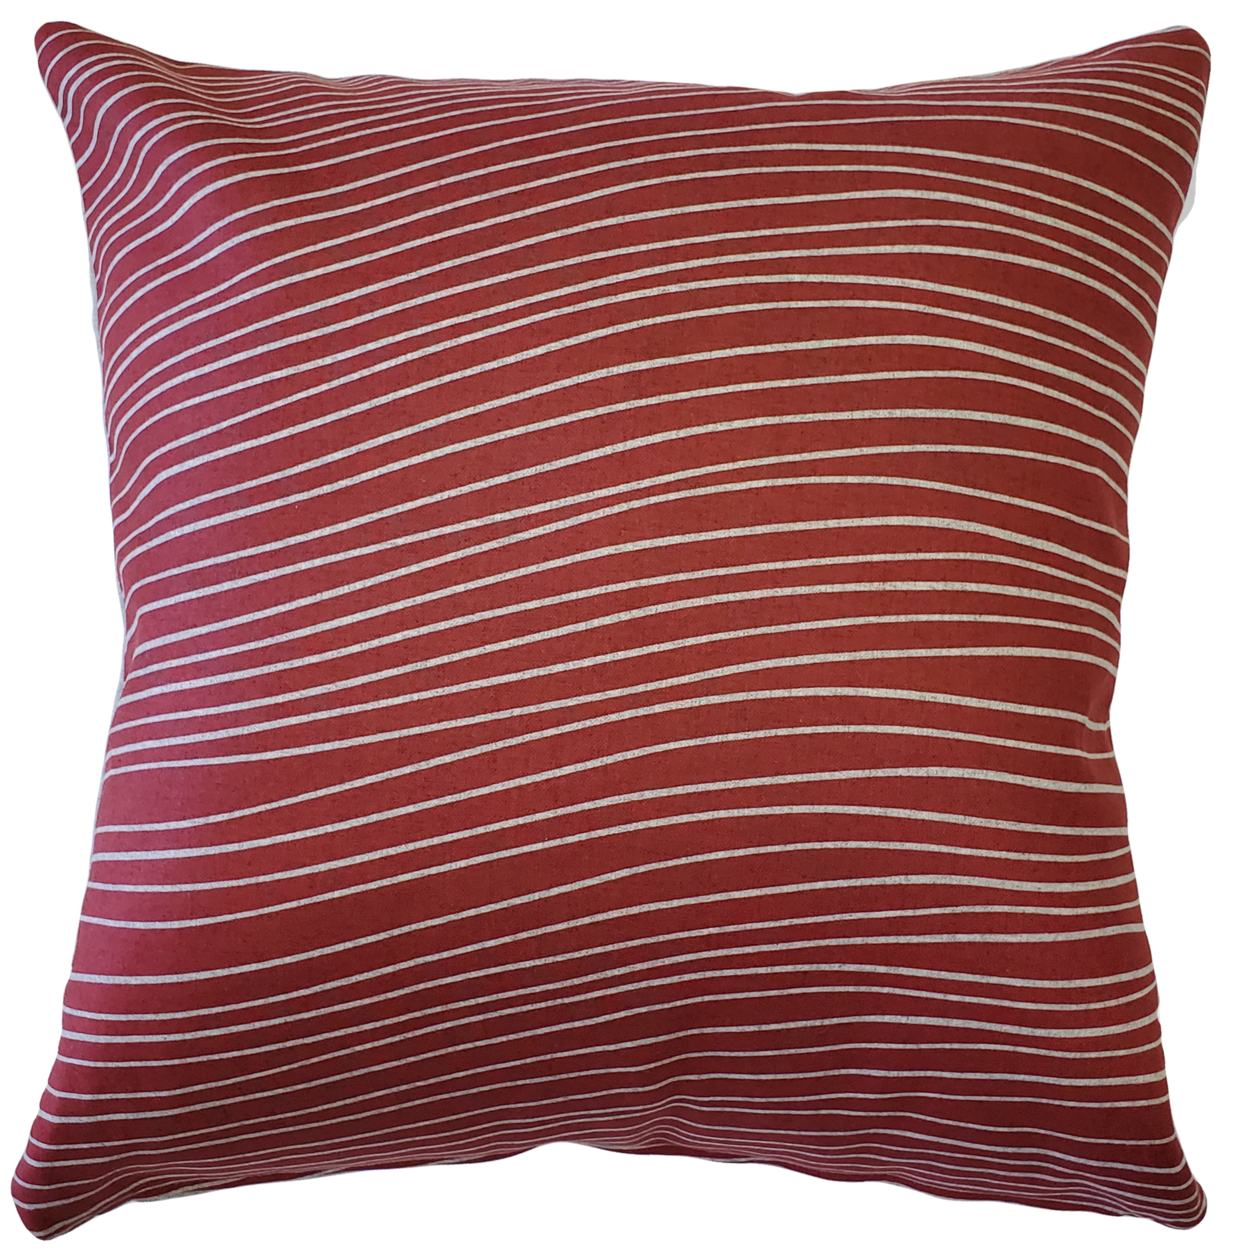 Meraki Spanish Red Throw Pillow 19x19 Inches Square, Complete Pillow With Polyfill Pillow Insert